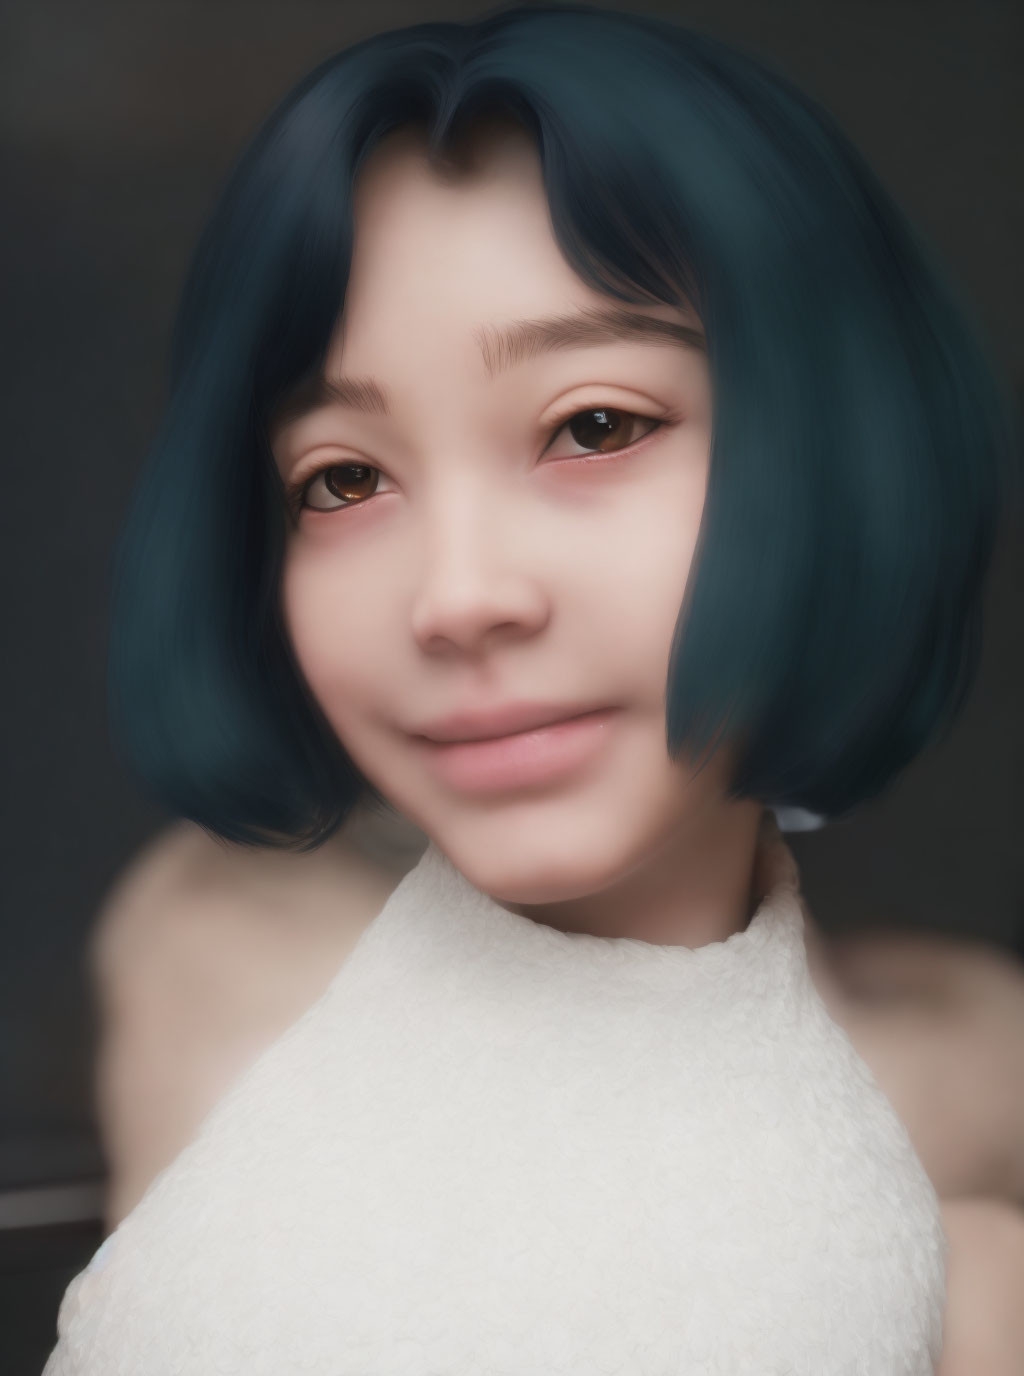 Portrait of a person with short blue hair and warm brown eyes